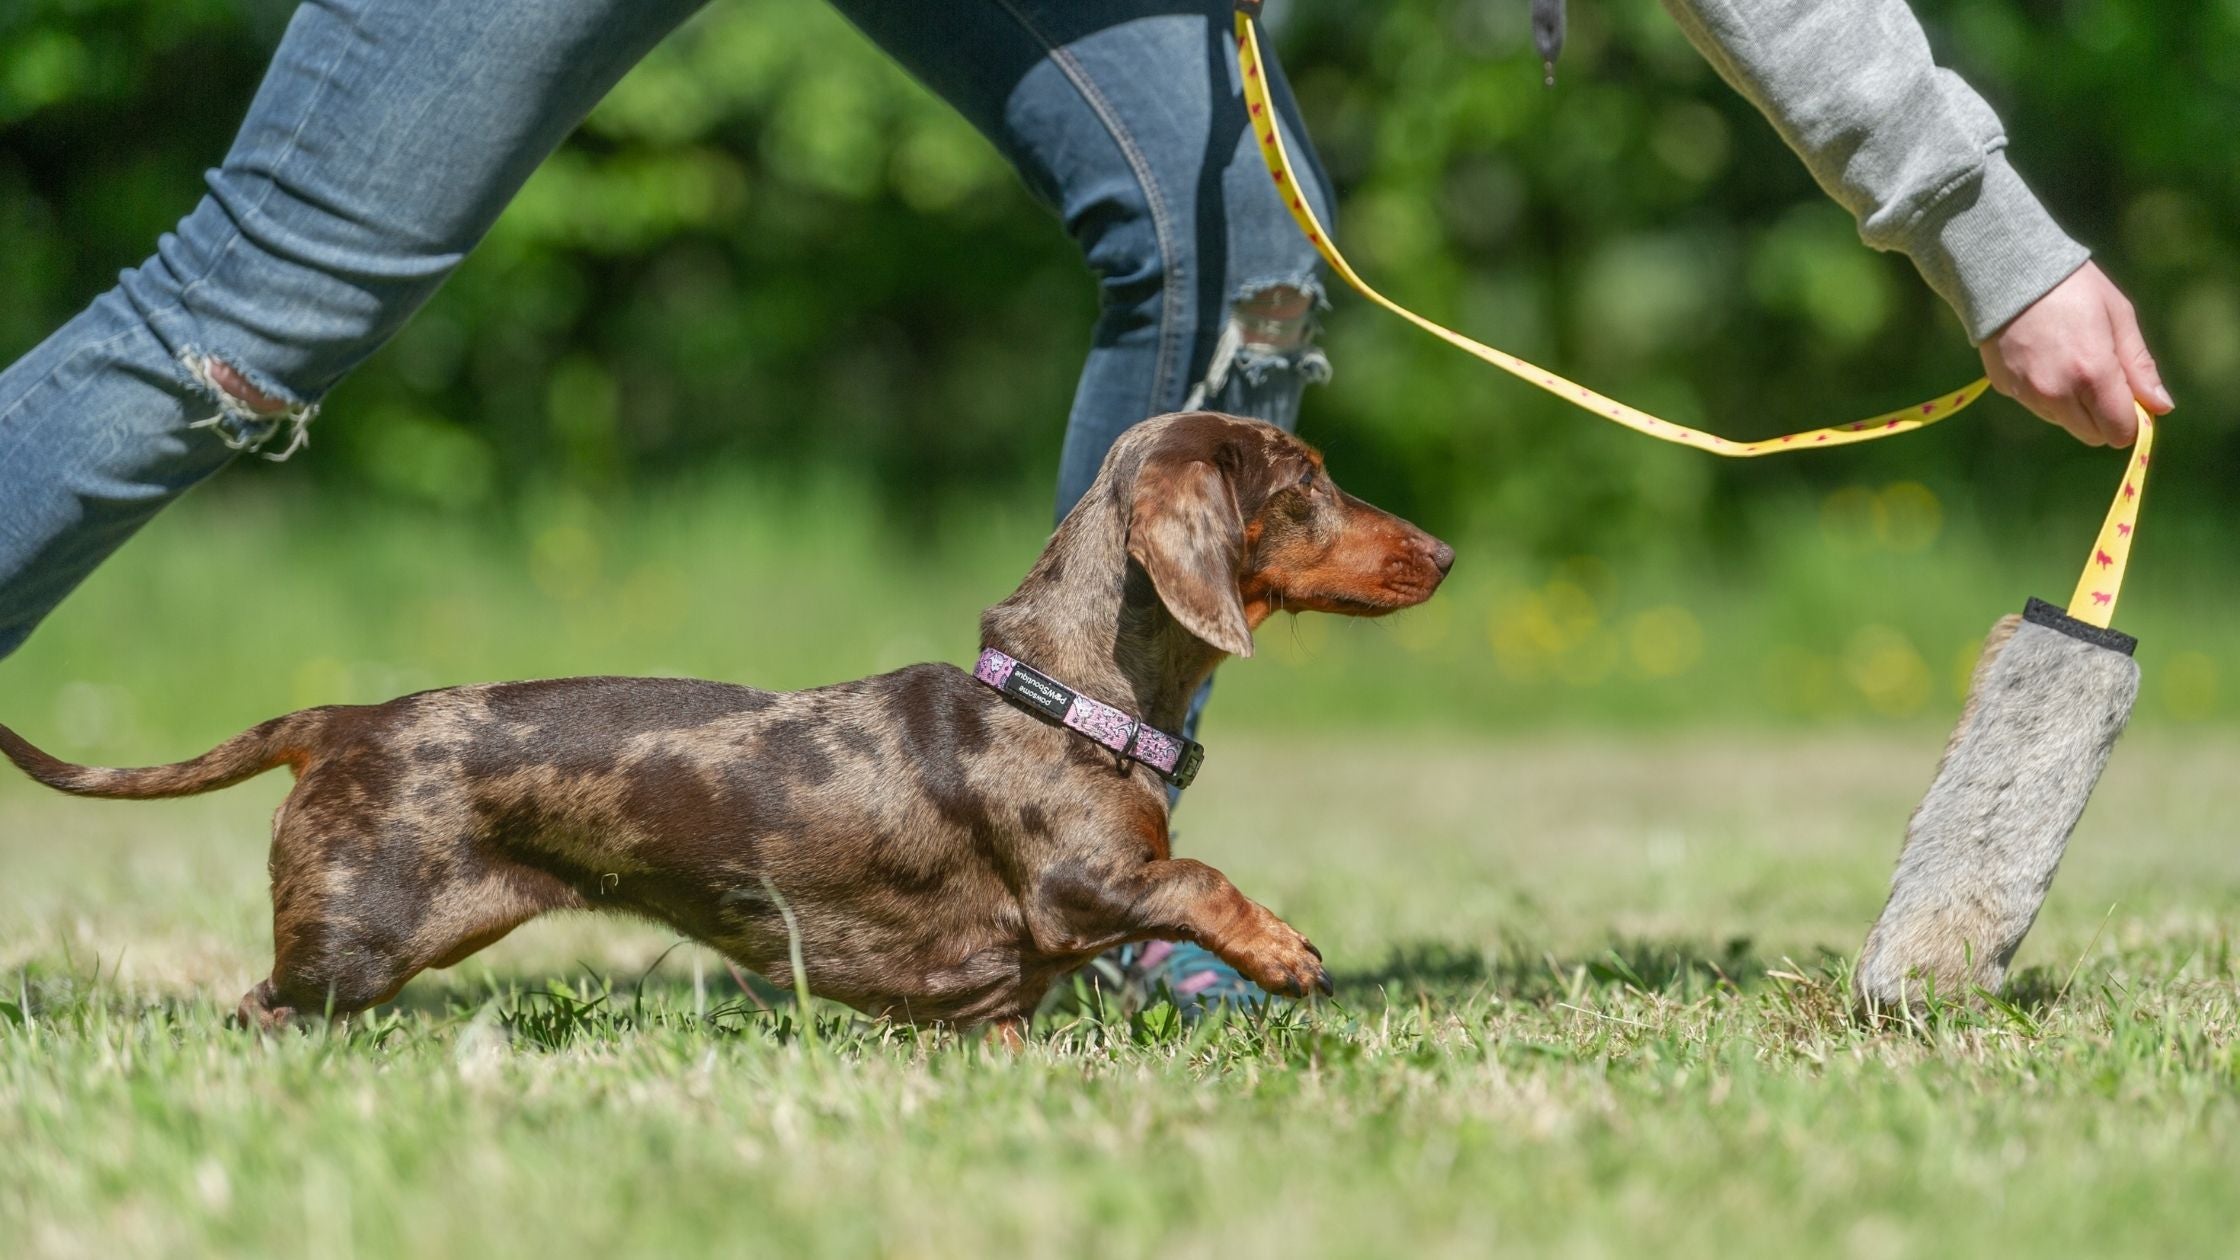 Our Top Toy Picks: 3 Best Toys for Dachshunds — Tug-E-Nuff